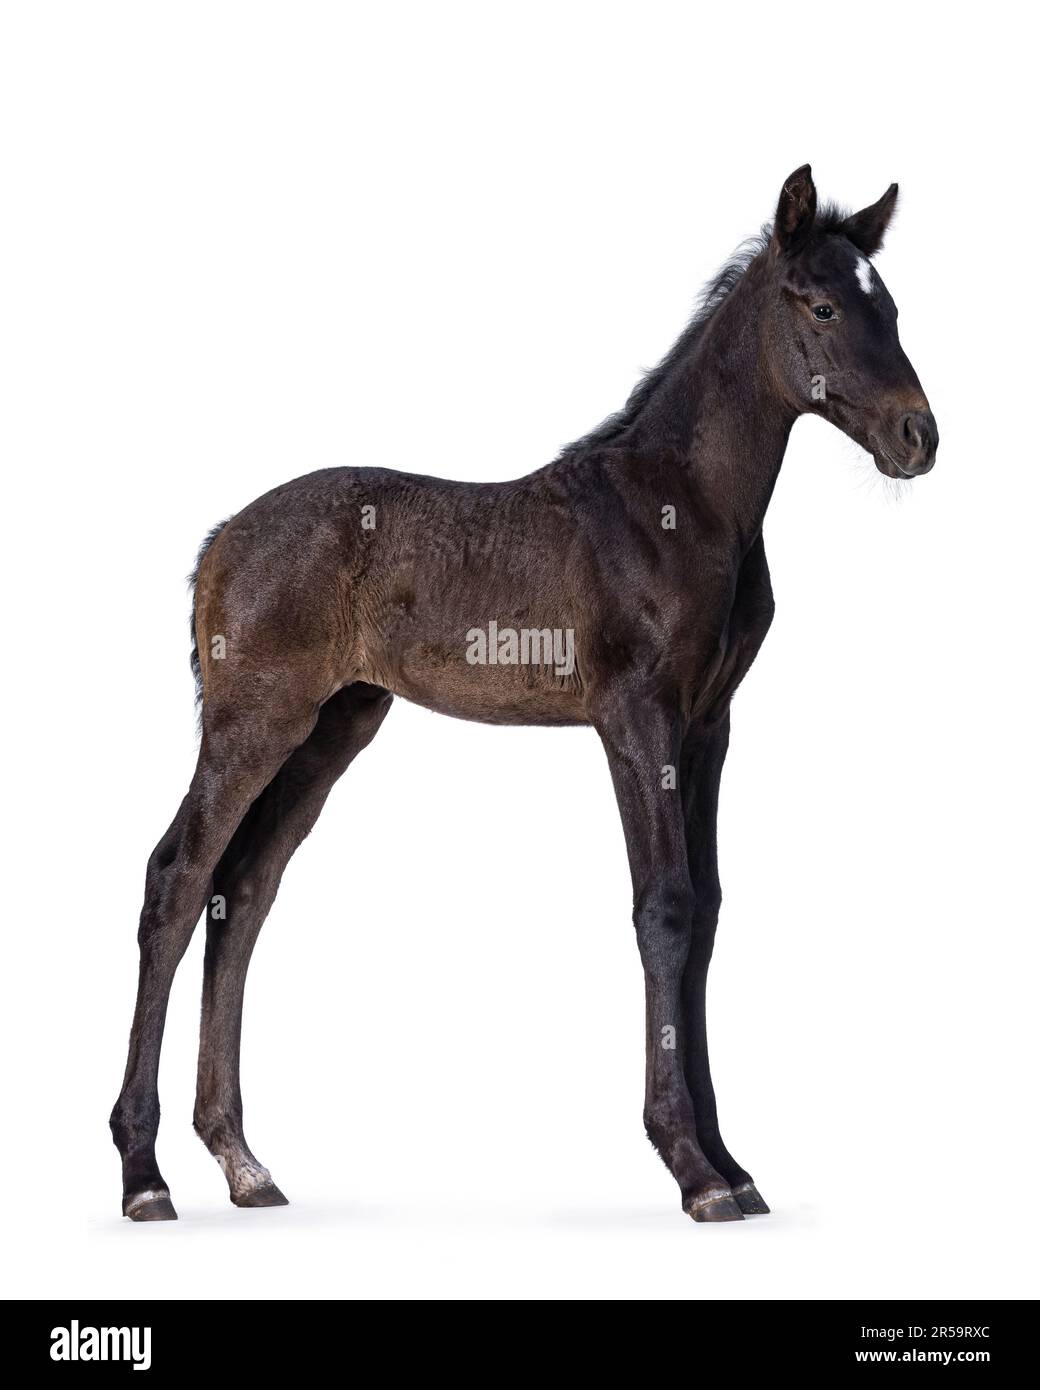 1 Month old dark brown Andalusian horse aka pura raza espanola, standing side ways. Looking side ways. Isolated on a white background. Stock Photo